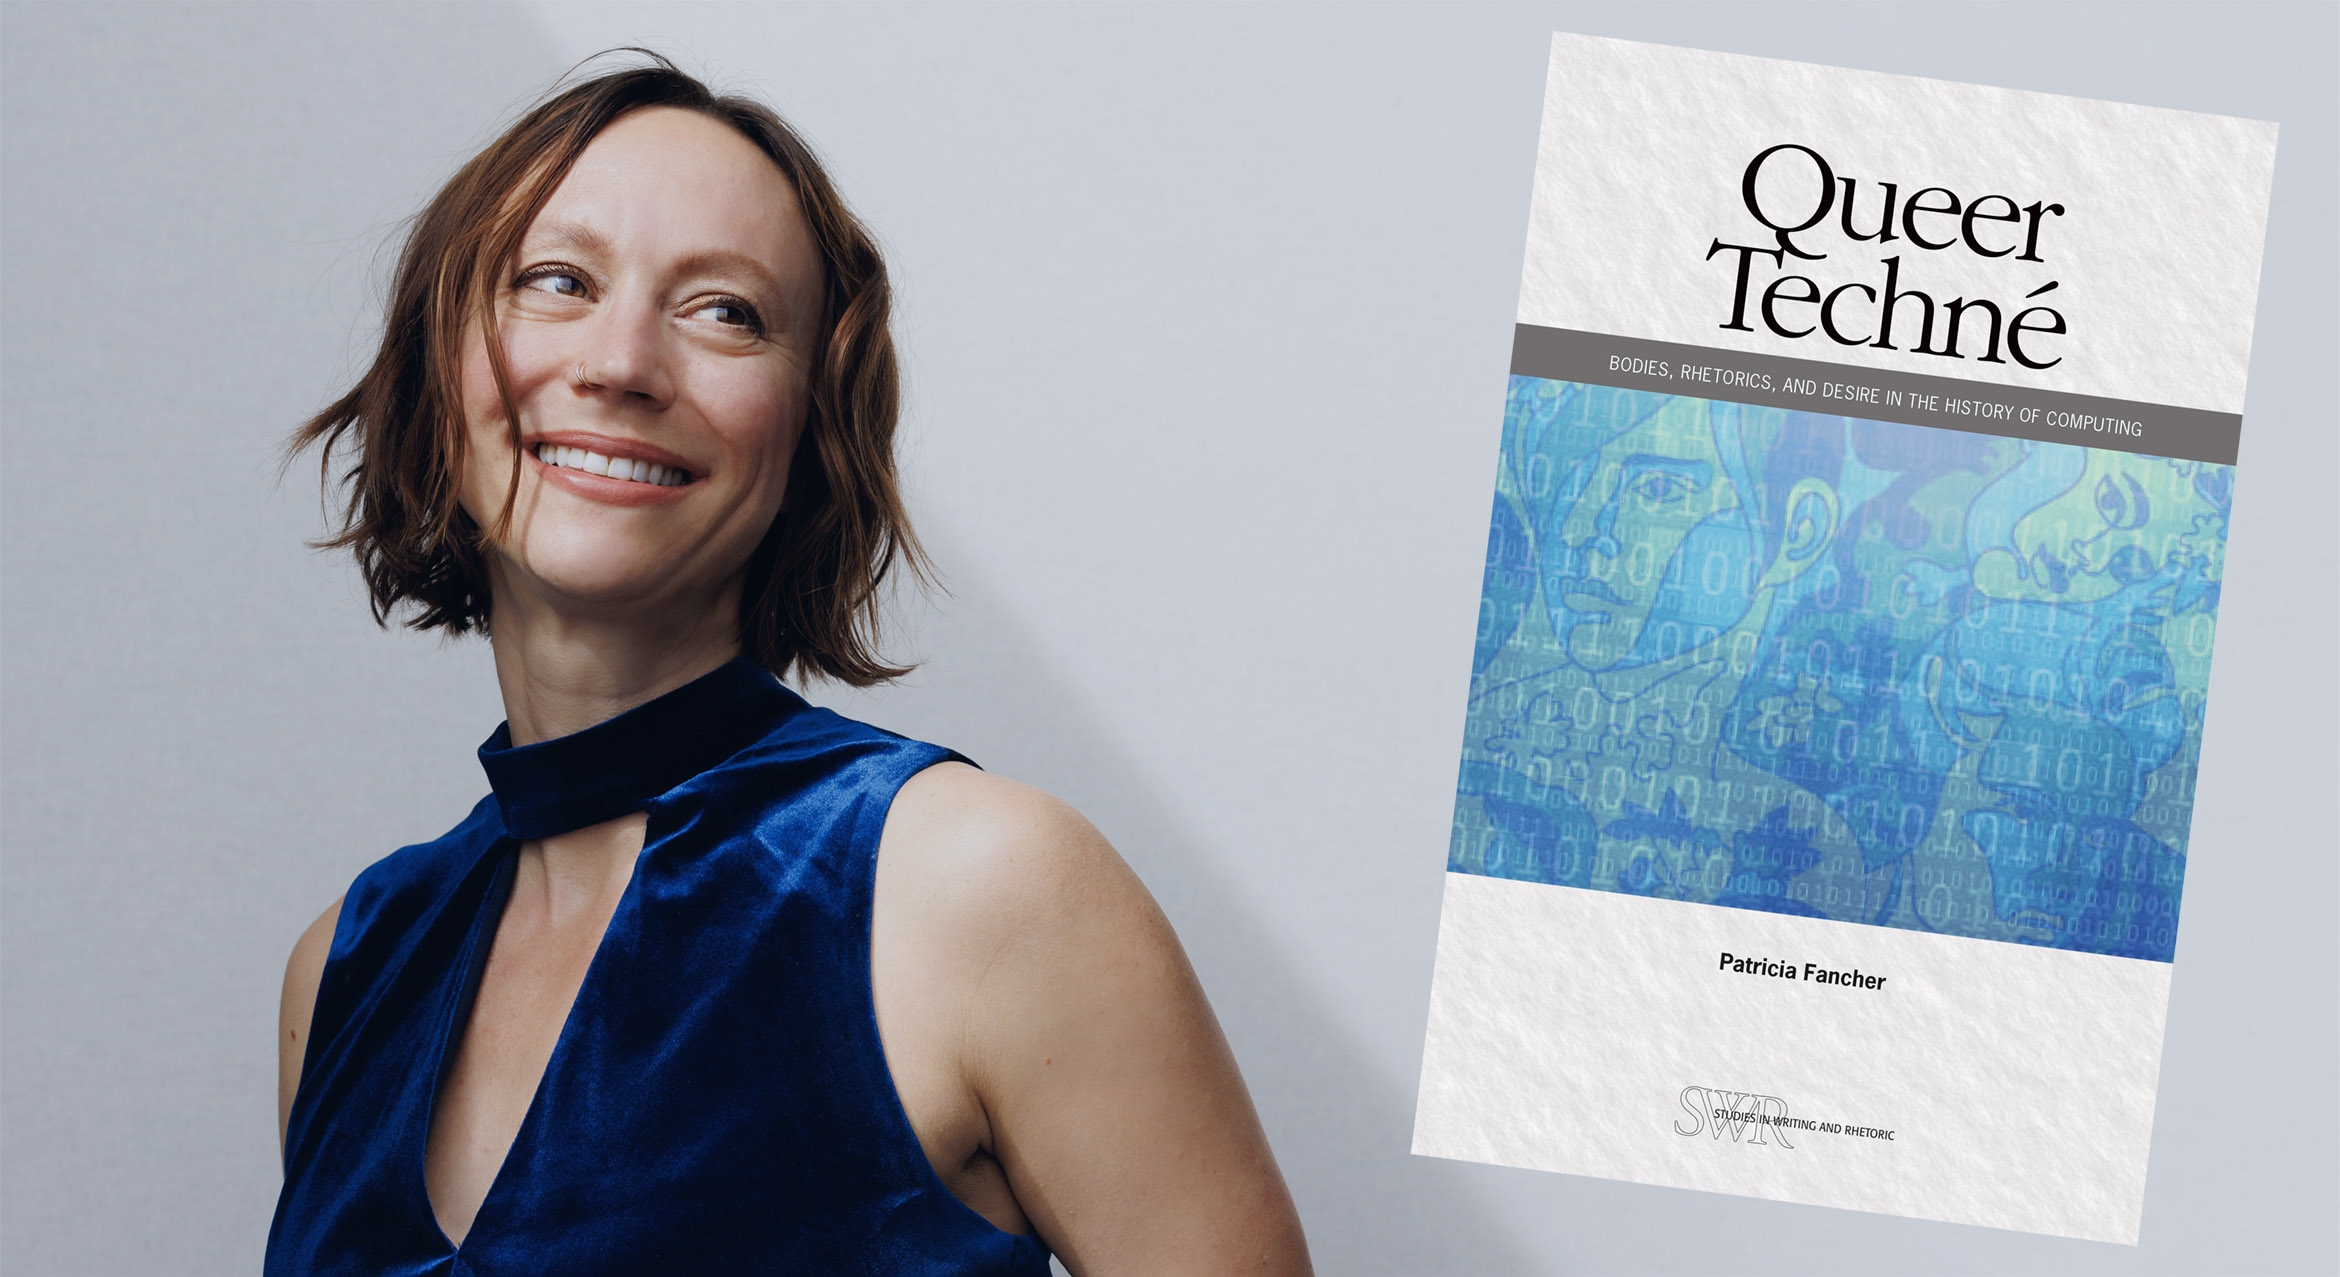 Photograph of author Patricia Fancher with her new book, Queer Techné